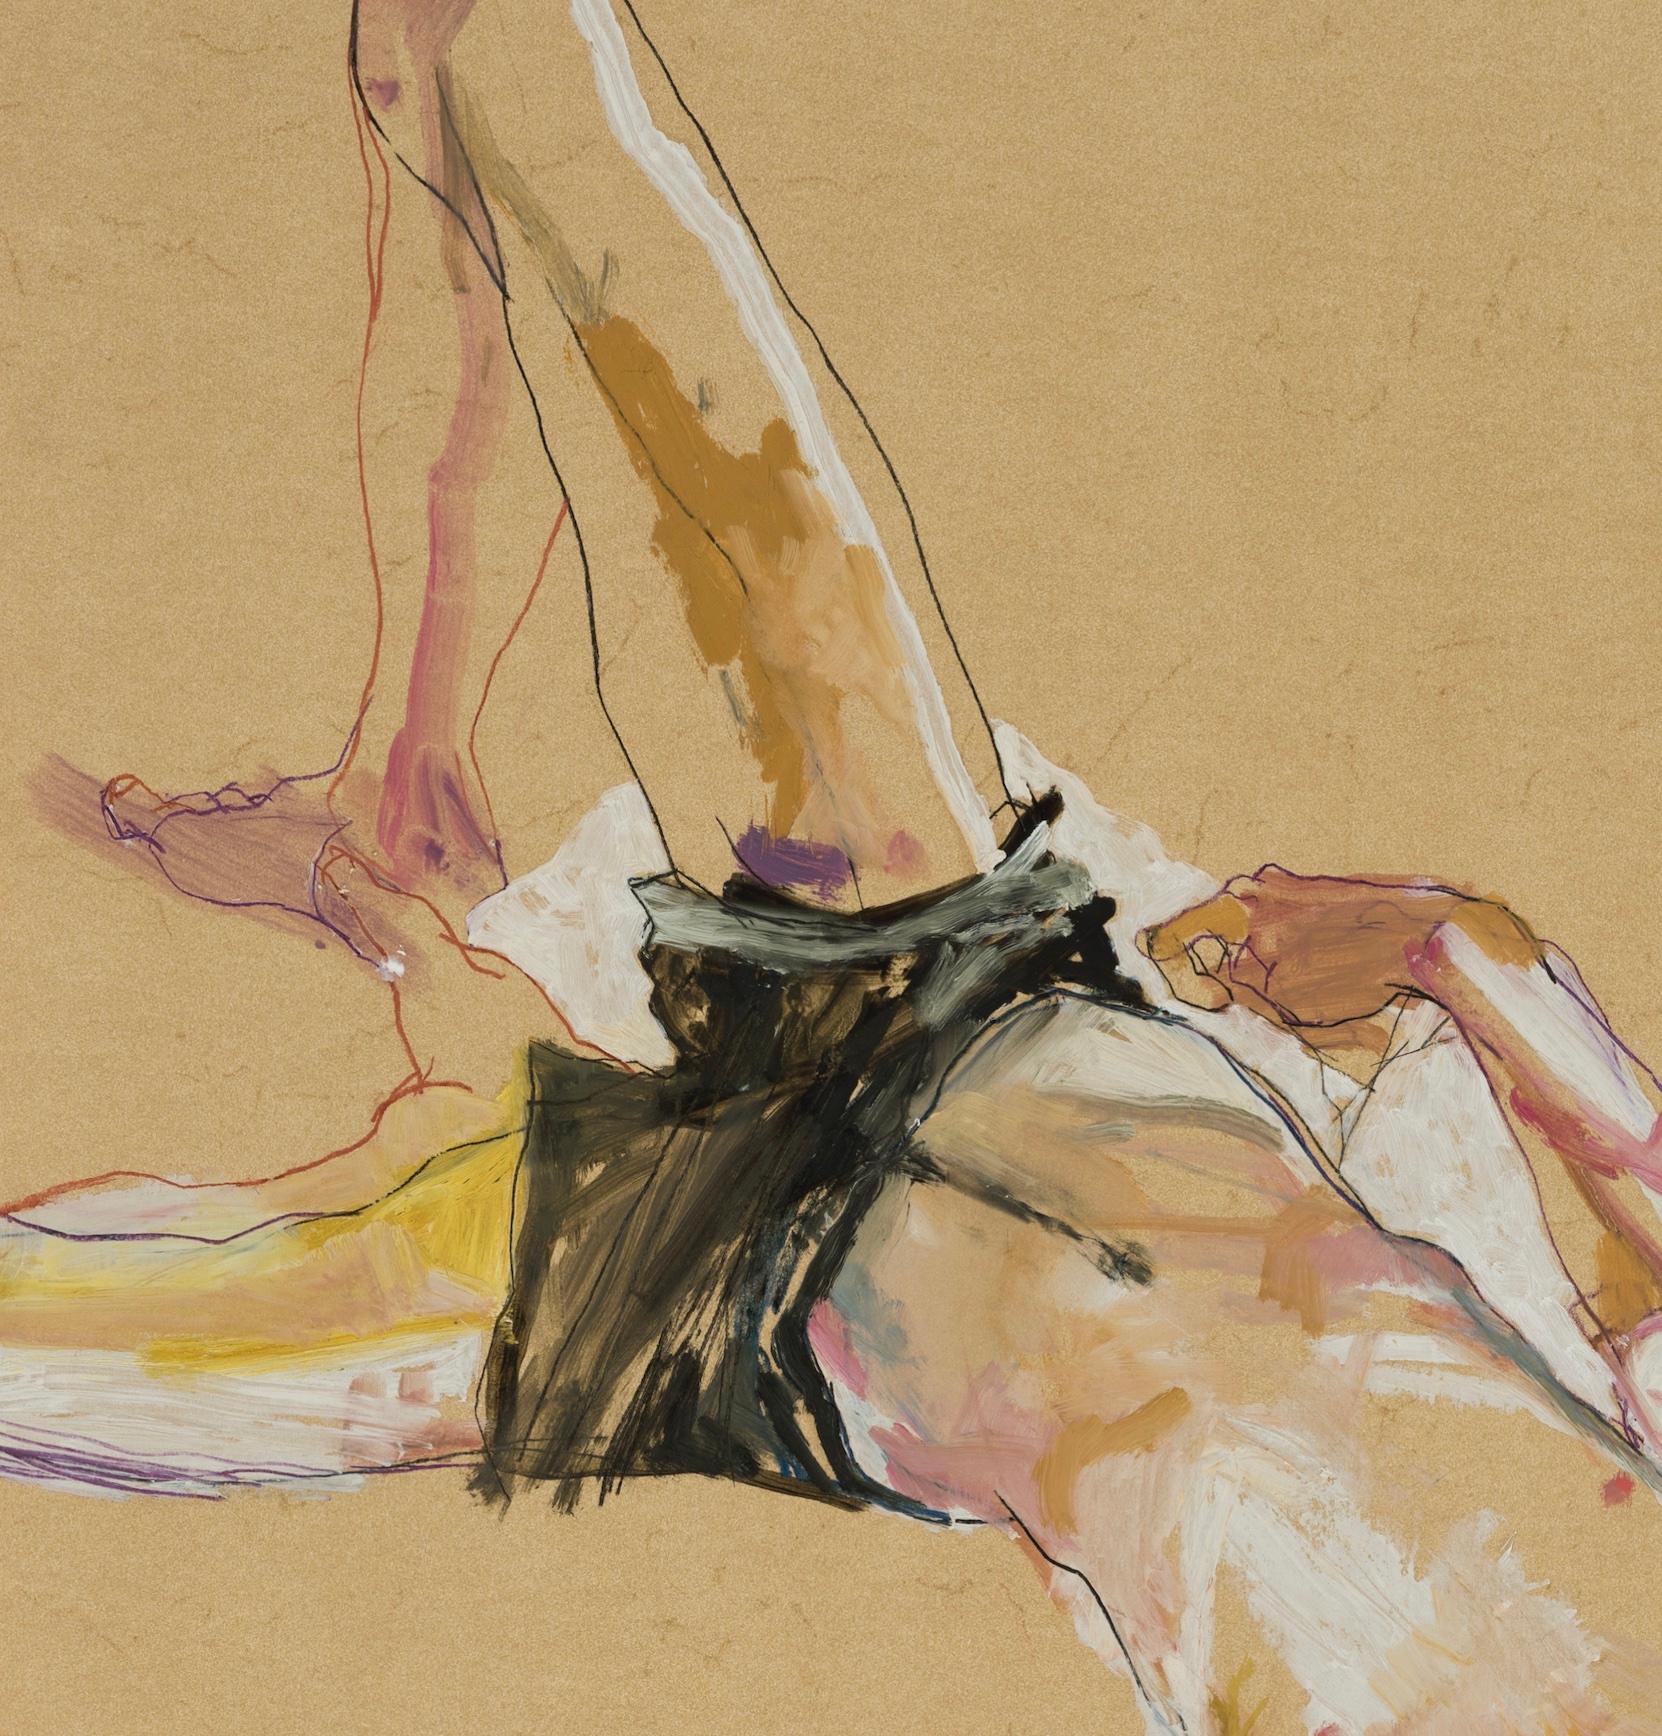 Andrew (Lying on White Pillow - Black Shorts), Mixed media on ochre parchment - Brown Figurative Painting by Howard Tangye